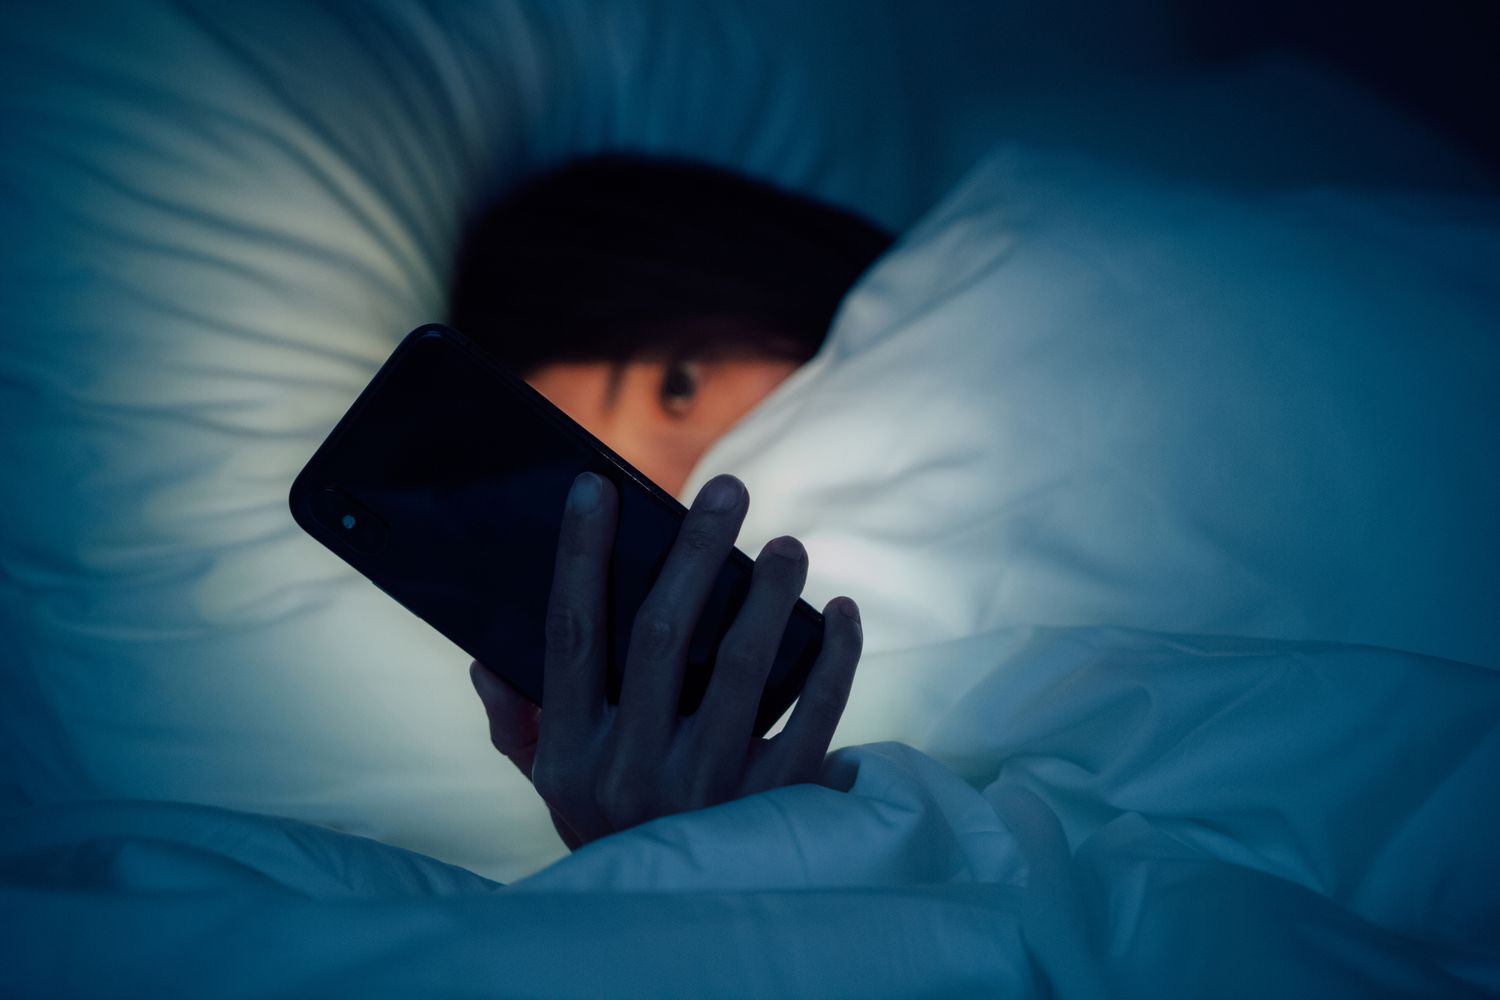 Smartphone Users’ Guide: Turning Off Blue Light On Your Phone